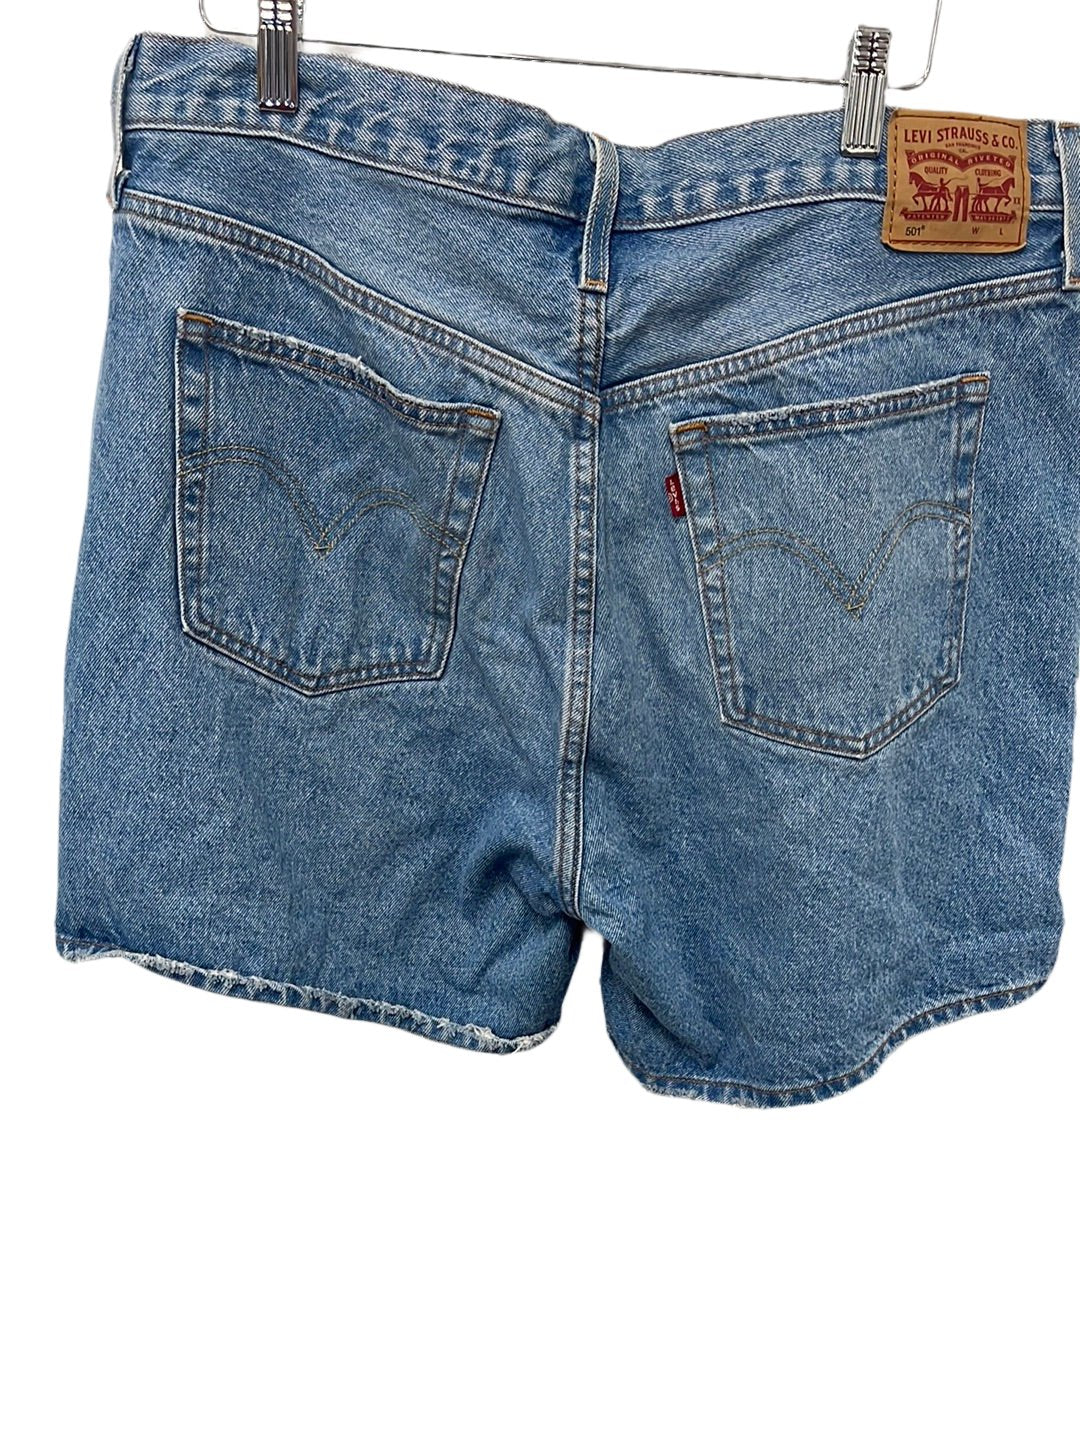 Levi's Button Fly Shorts - Size  18